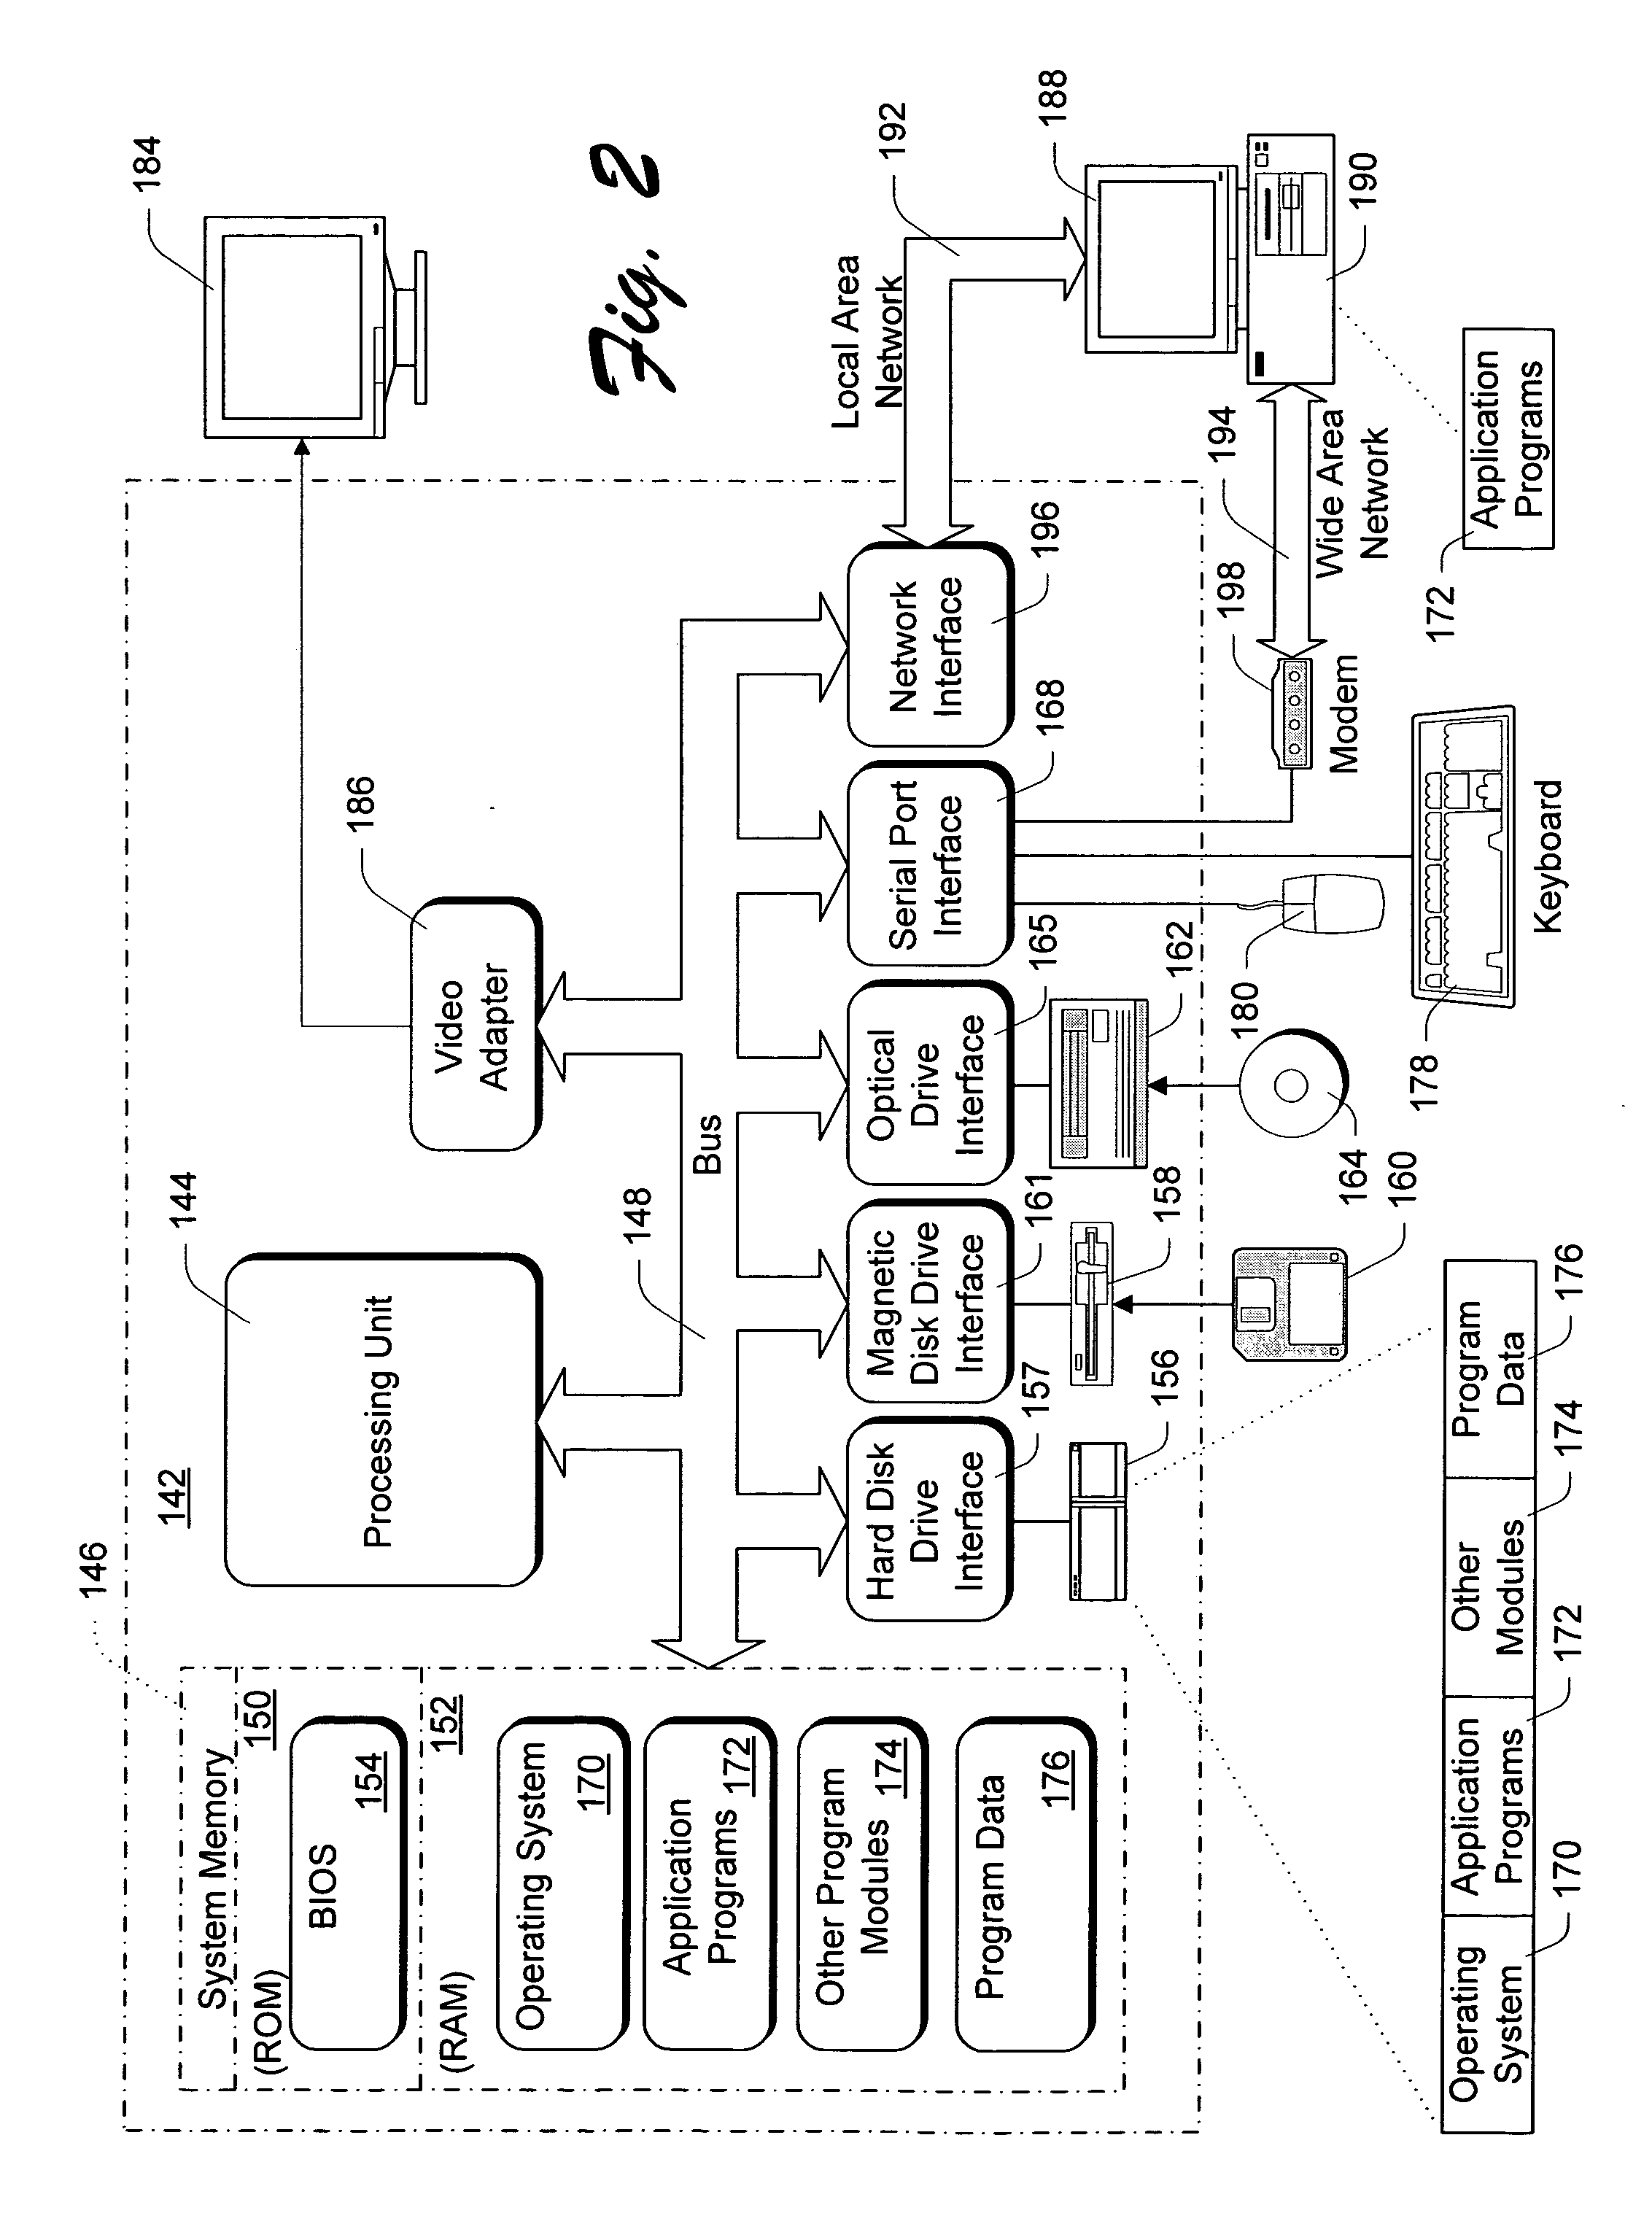 System and method for distributed management of shared computers